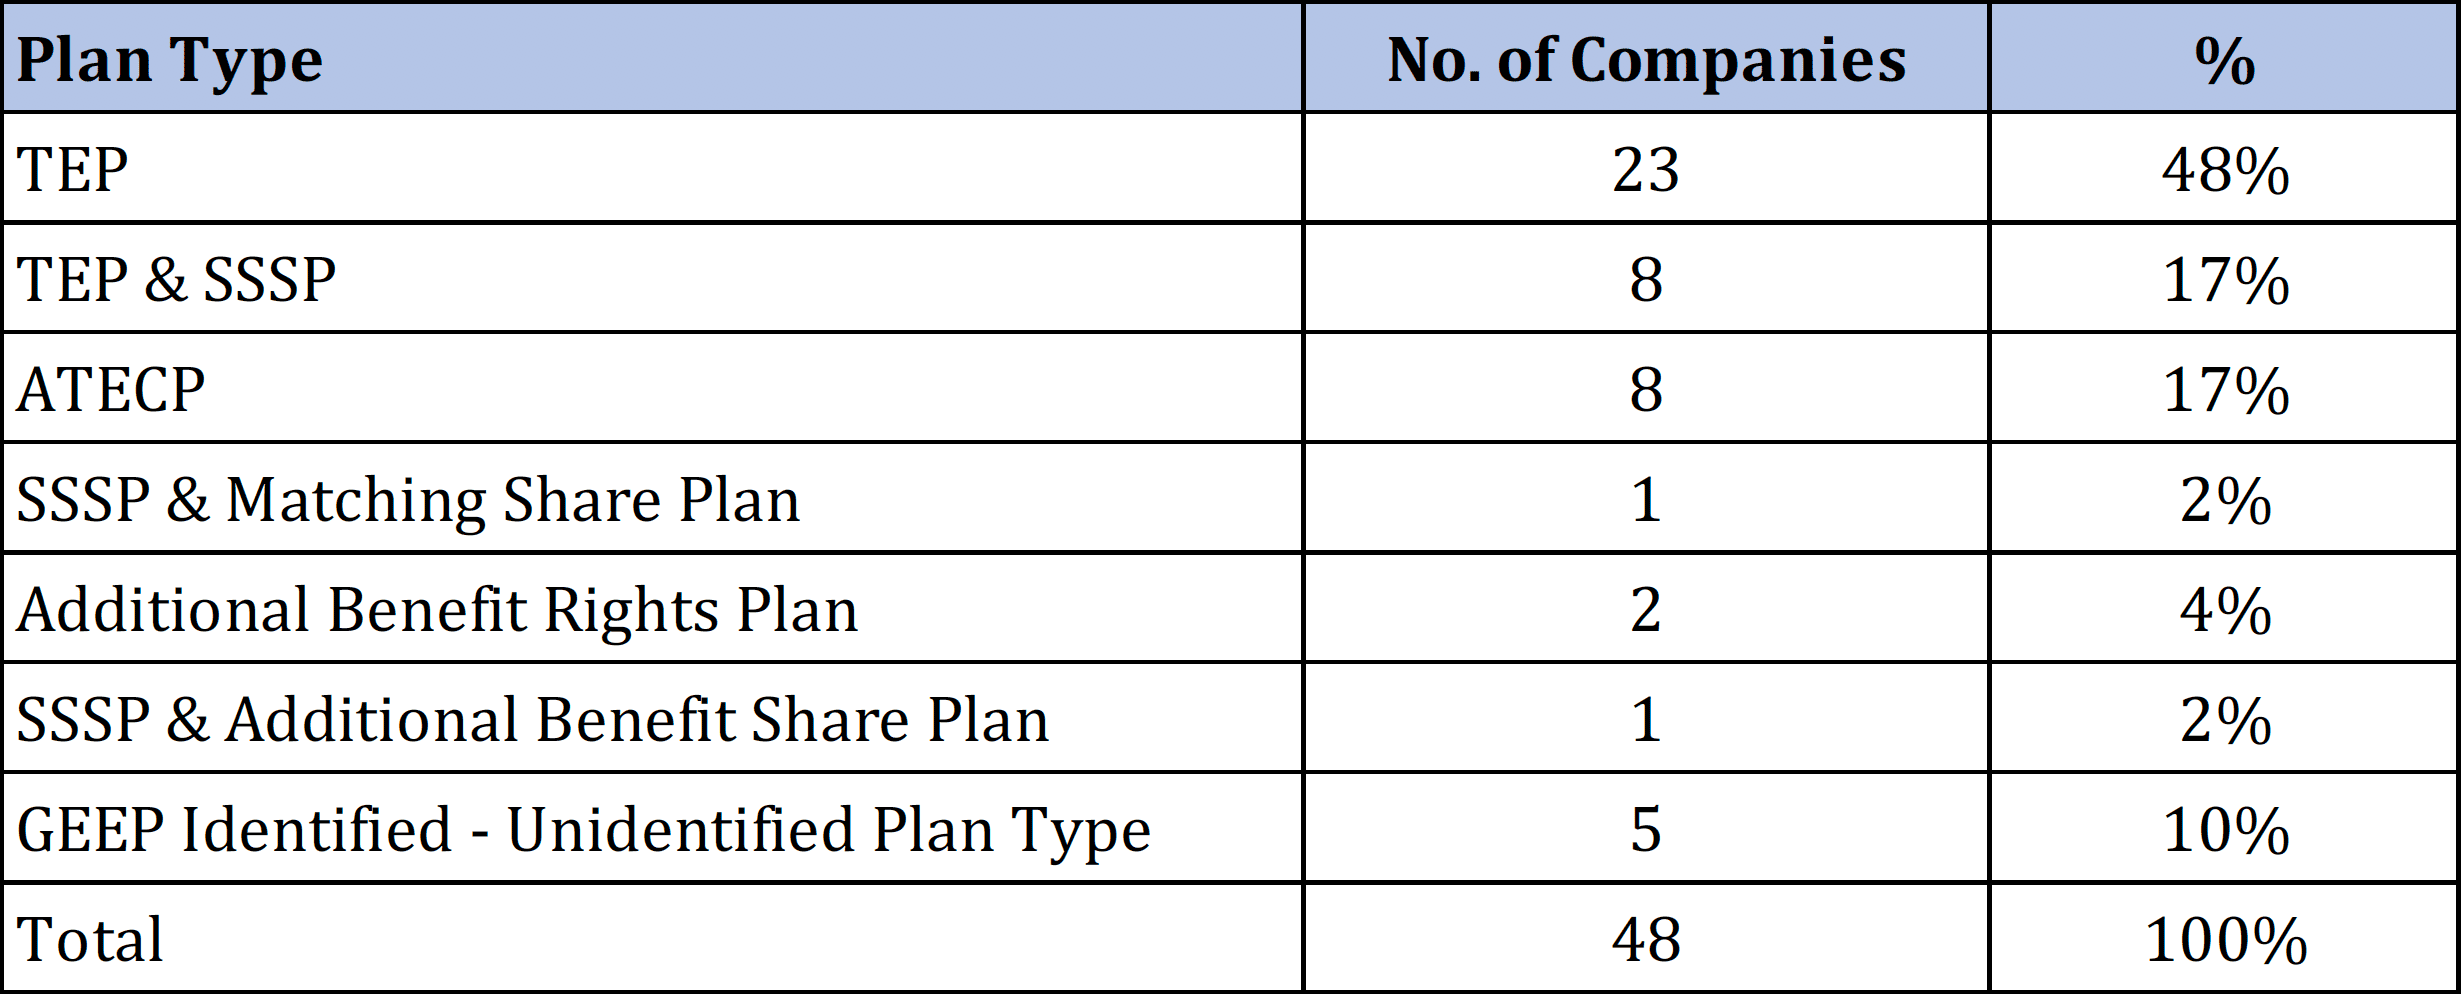 Combinations of plan types amongst the ASX100 companies in our analysis